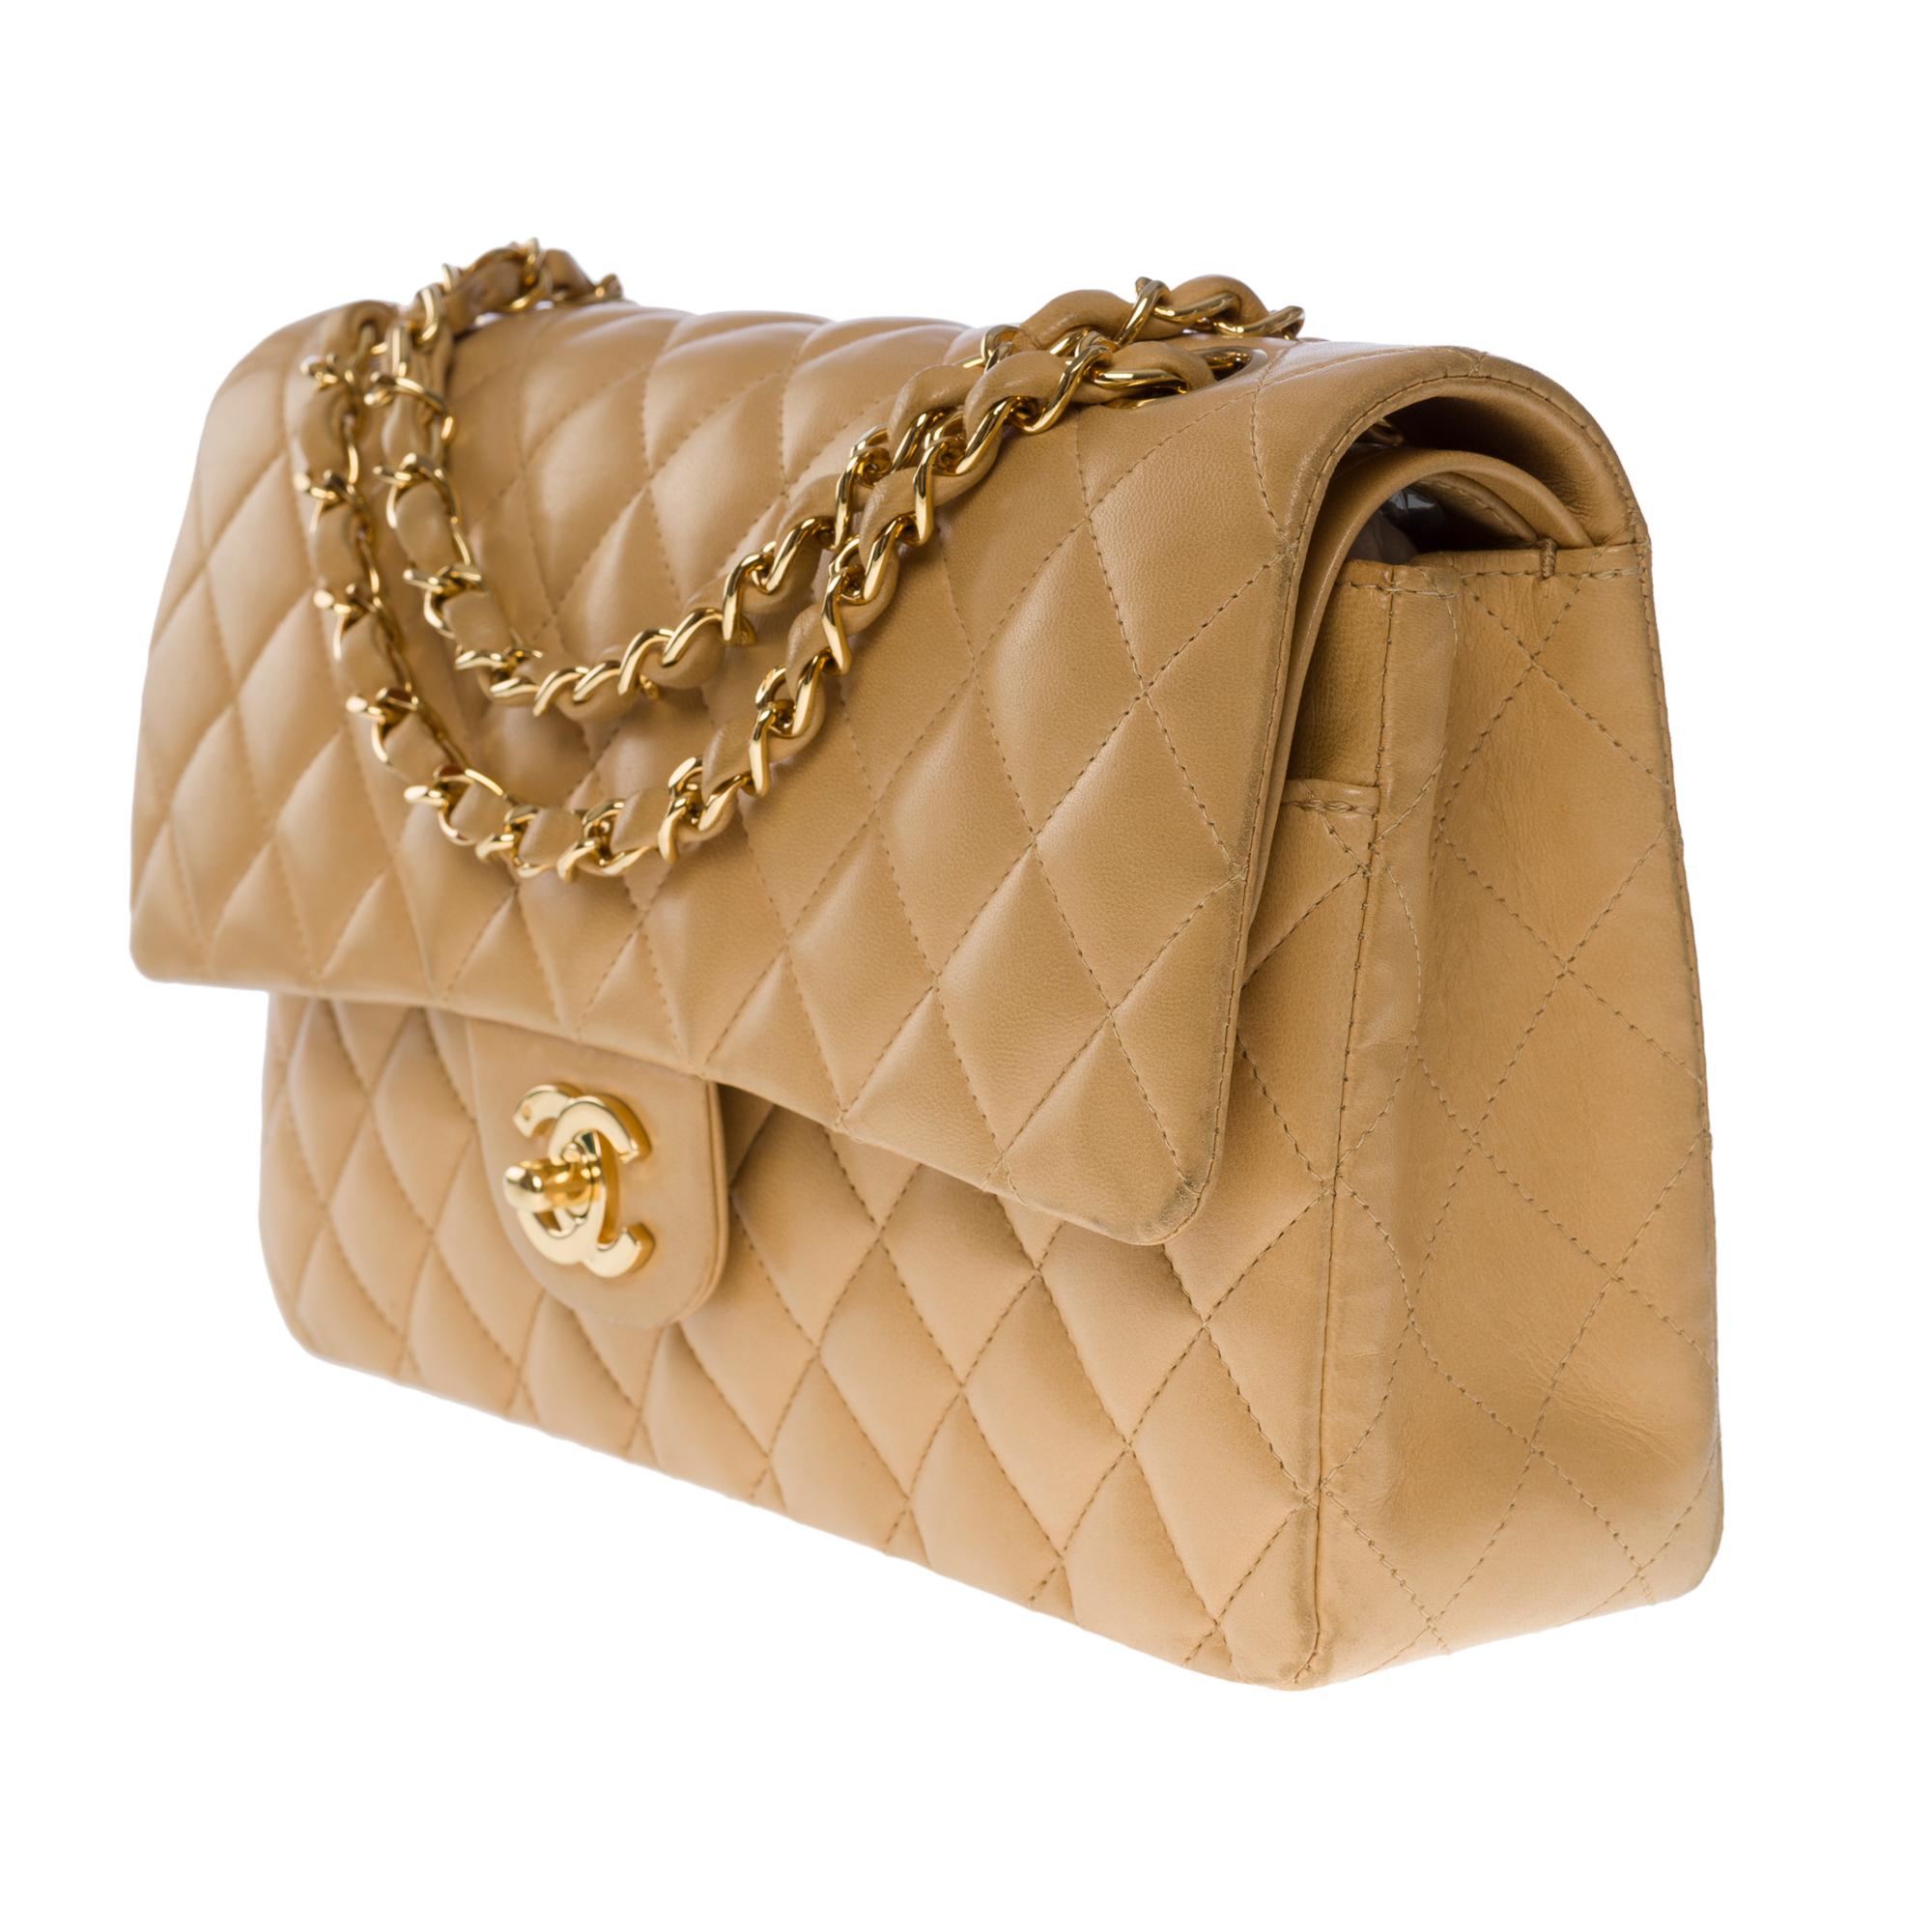 Women's Chanel Timeless medium double flap shoulder bag in beige quilted lambskin, GHW For Sale